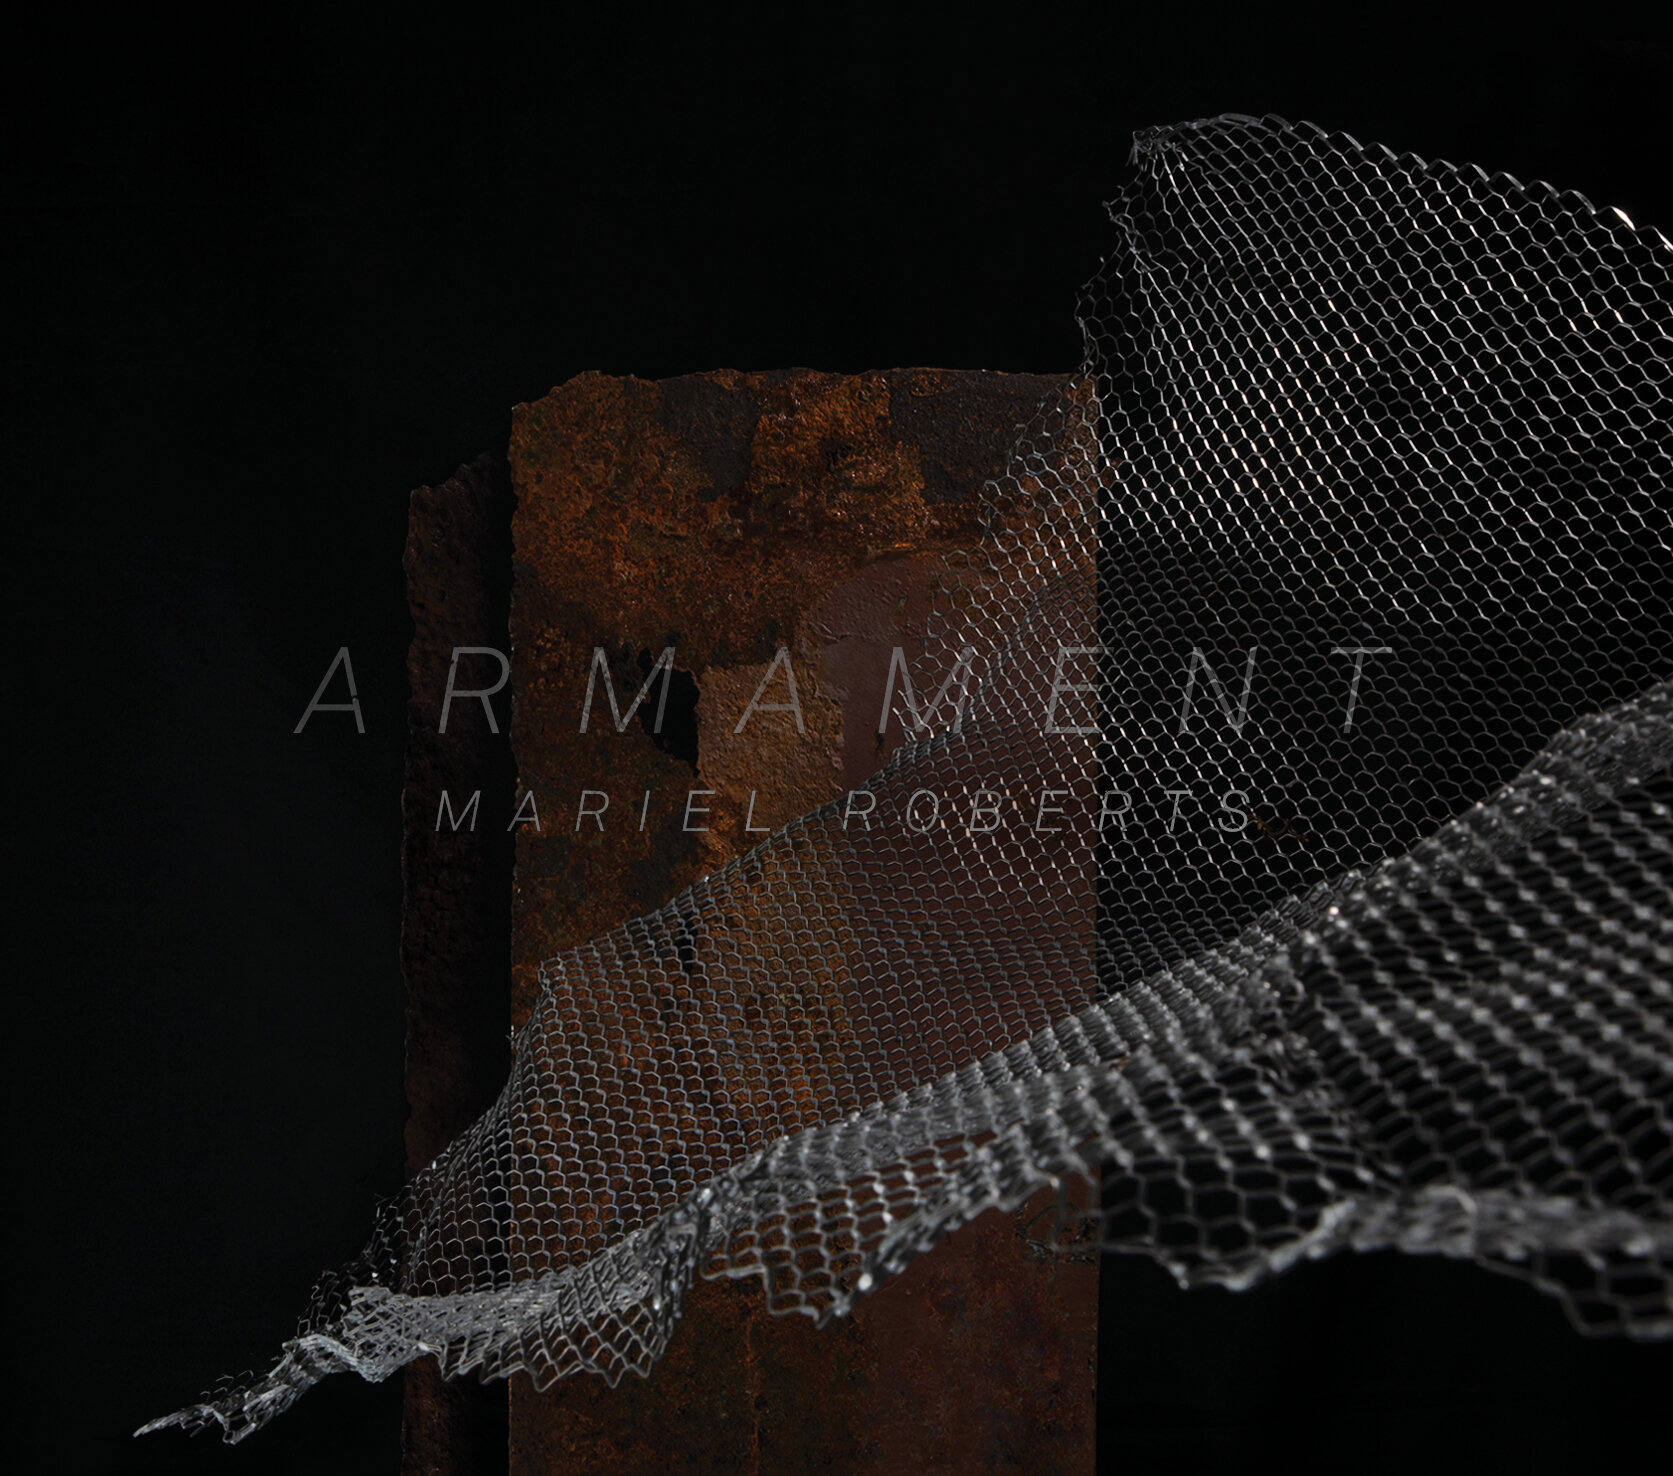  Album cover for   Armament  by Mariel Roberts , released on  figureight records , collaboration with Emma Van Deun 